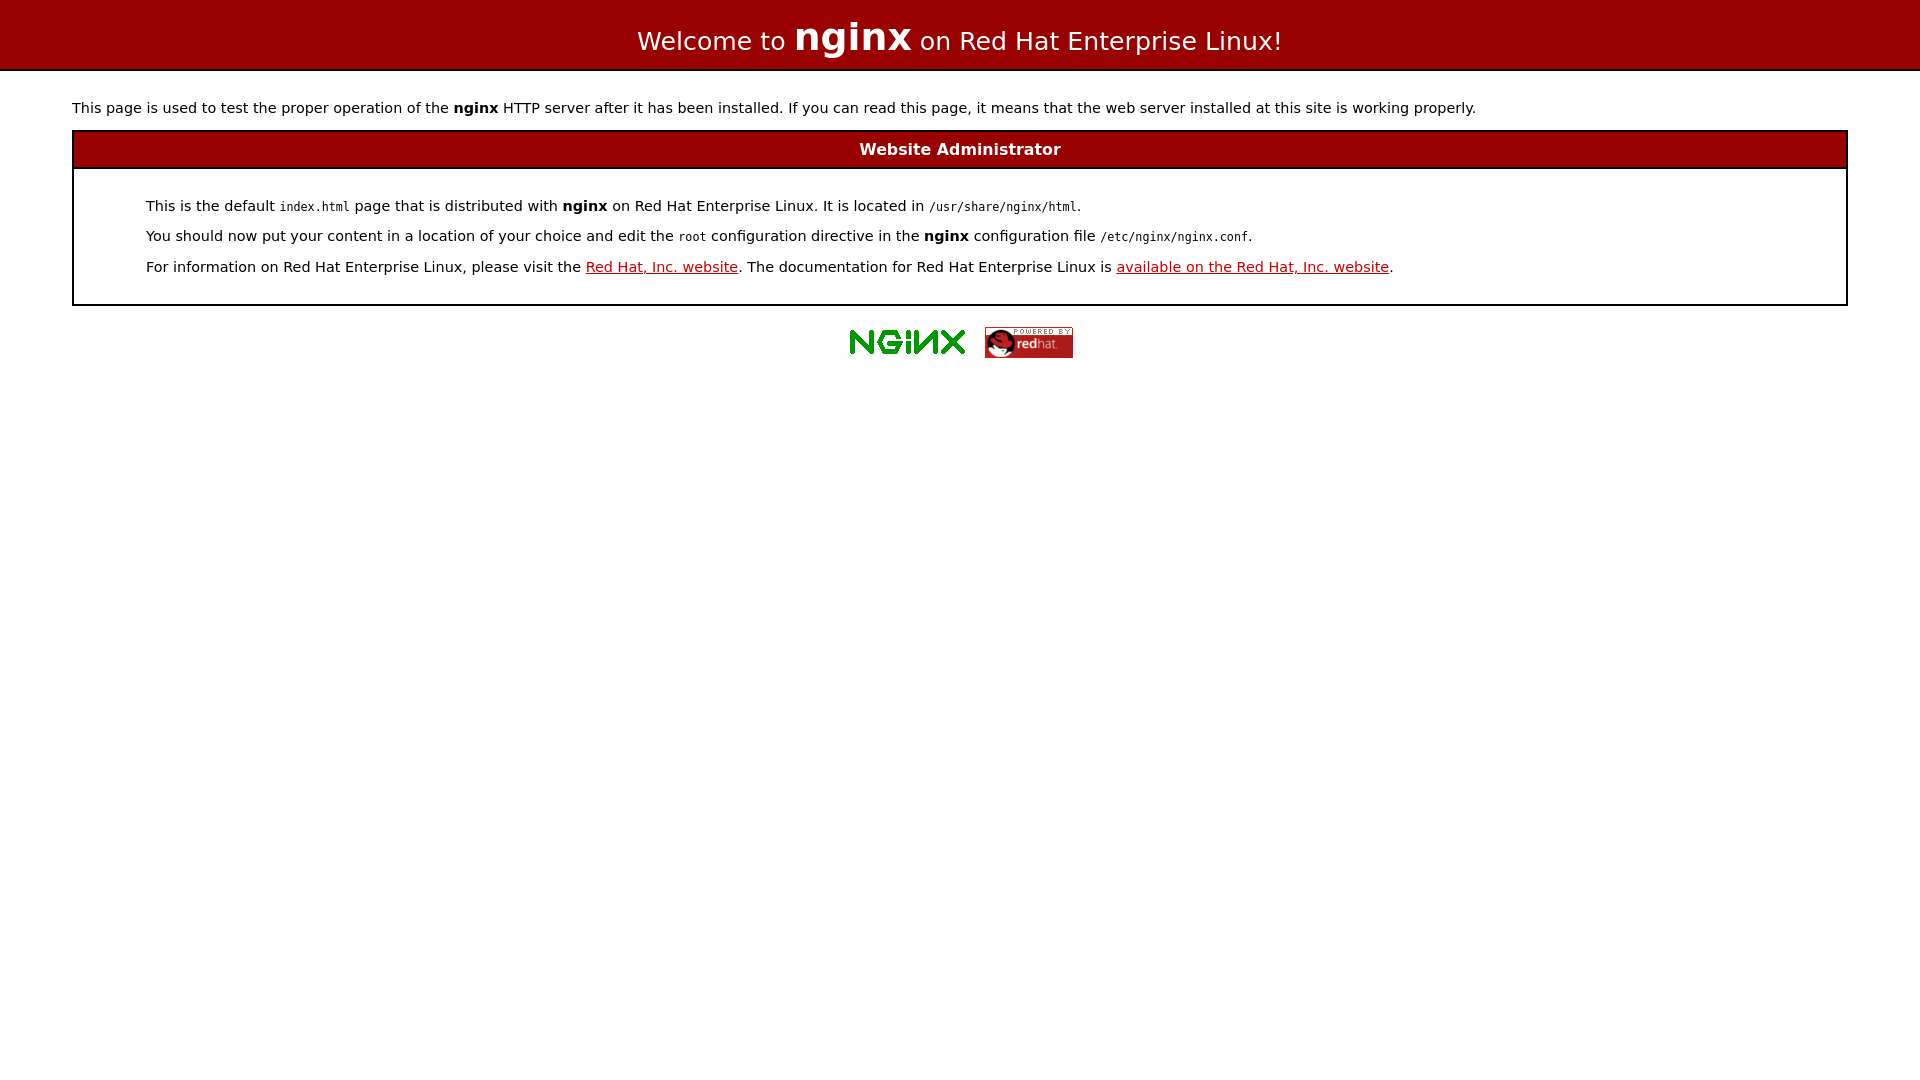 Test Page for the Nginx HTTP Server on Red Hat Enterprise Linux截图时间：2024-01-28